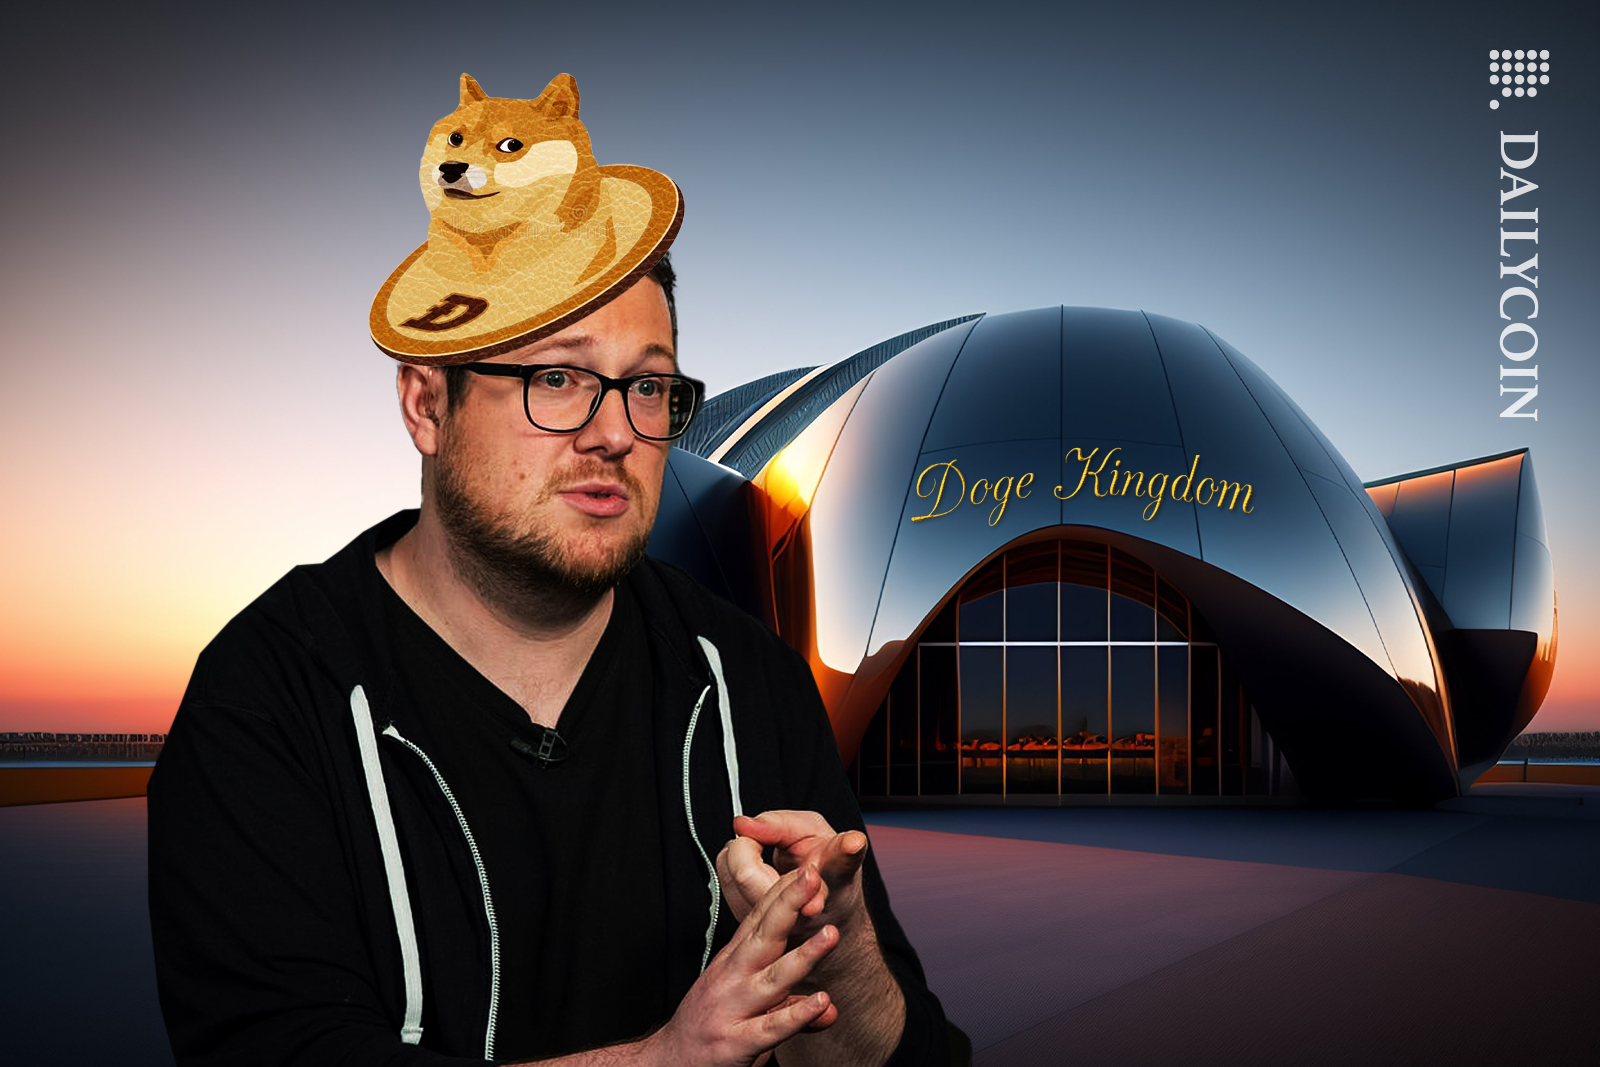 Billy Markus wearing a Doge coin cowboy hat is talking and explaining in front of a modern house with a gold Doge Kingdom sign above the entrance door.